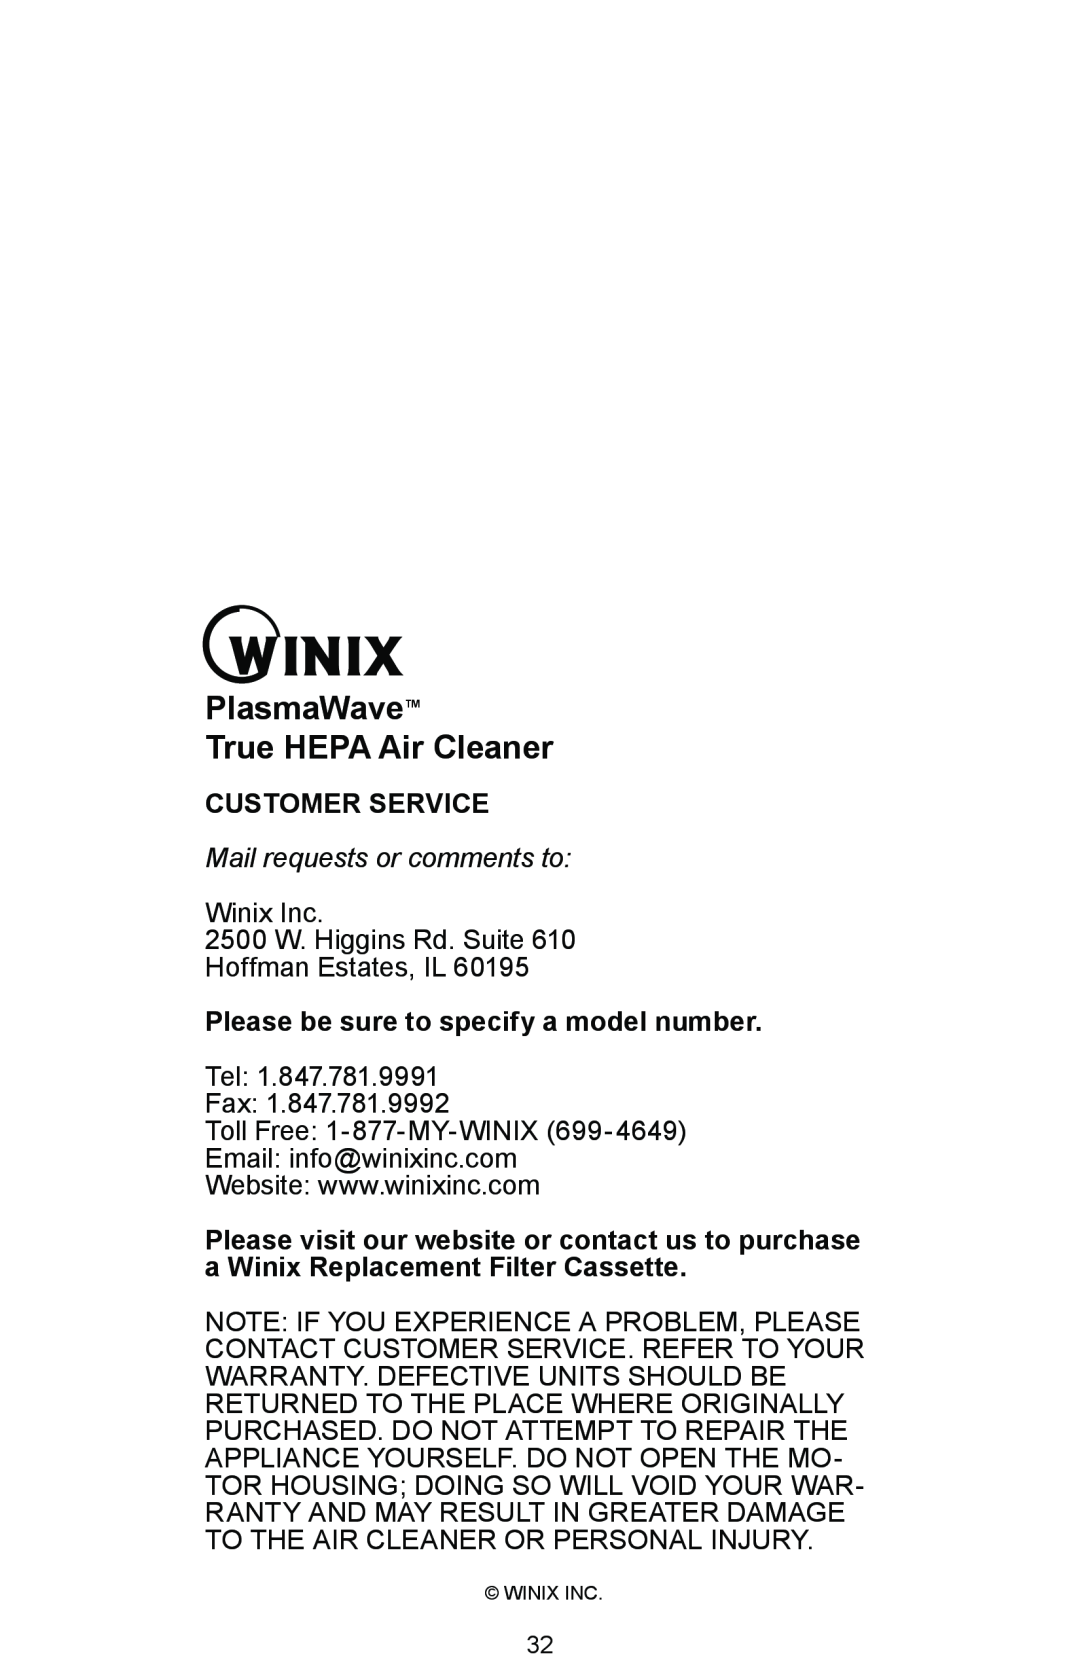 Winix WAC-9000 warranty PlasmaWave True HEPA Air Cleaner, Customer Service, Mail requests or comments to 